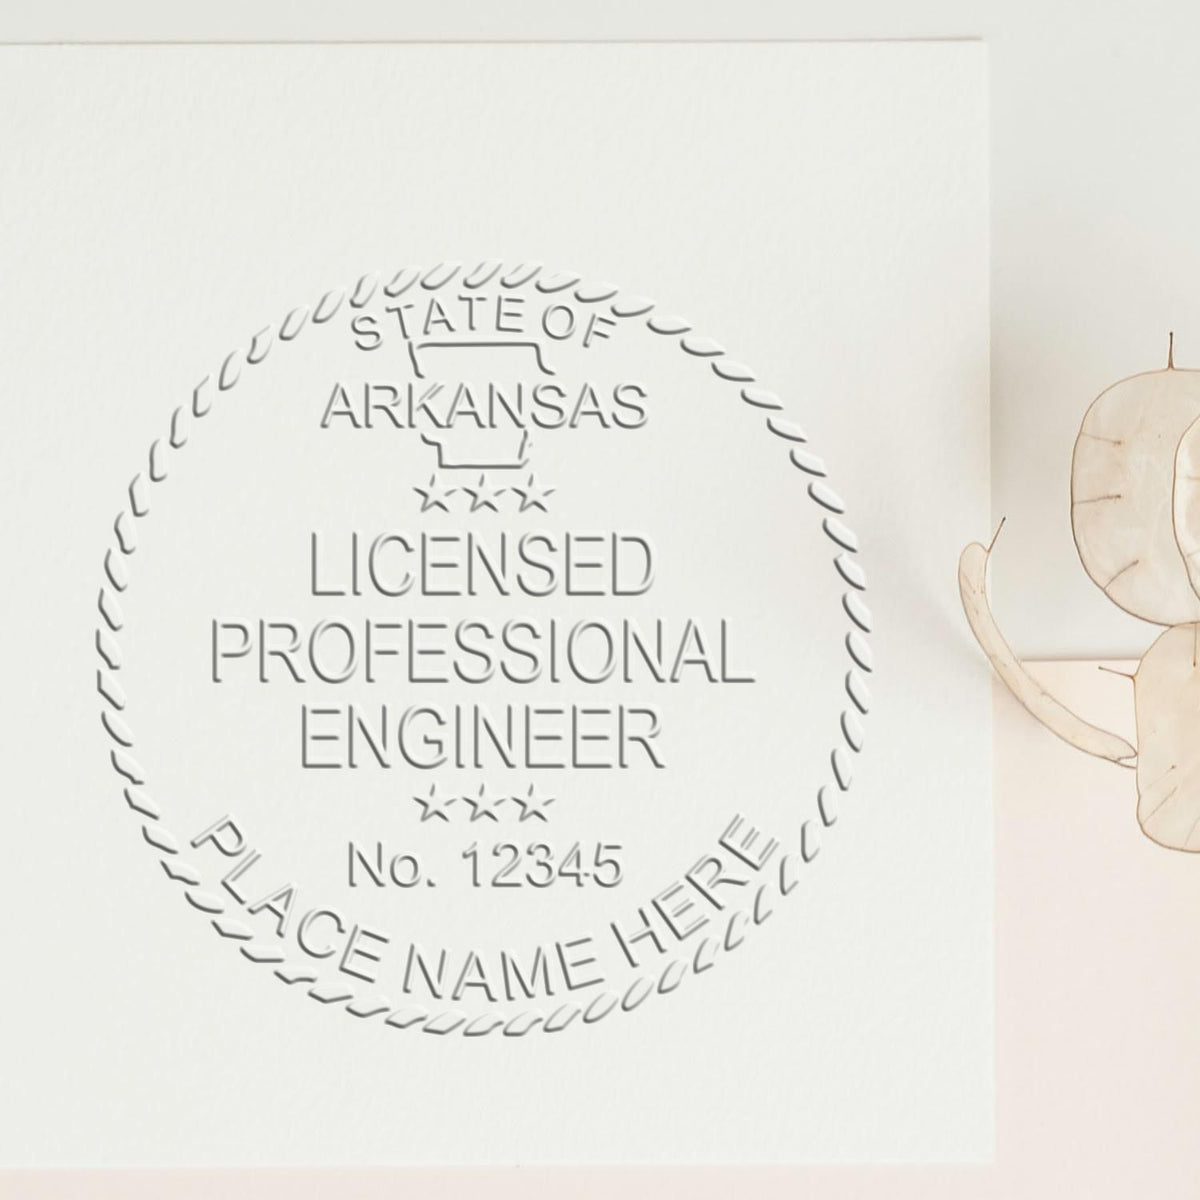 The Heavy Duty Cast Iron Arkansas Engineer Seal Embosser stamp impression comes to life with a crisp, detailed photo on paper - showcasing true professional quality.